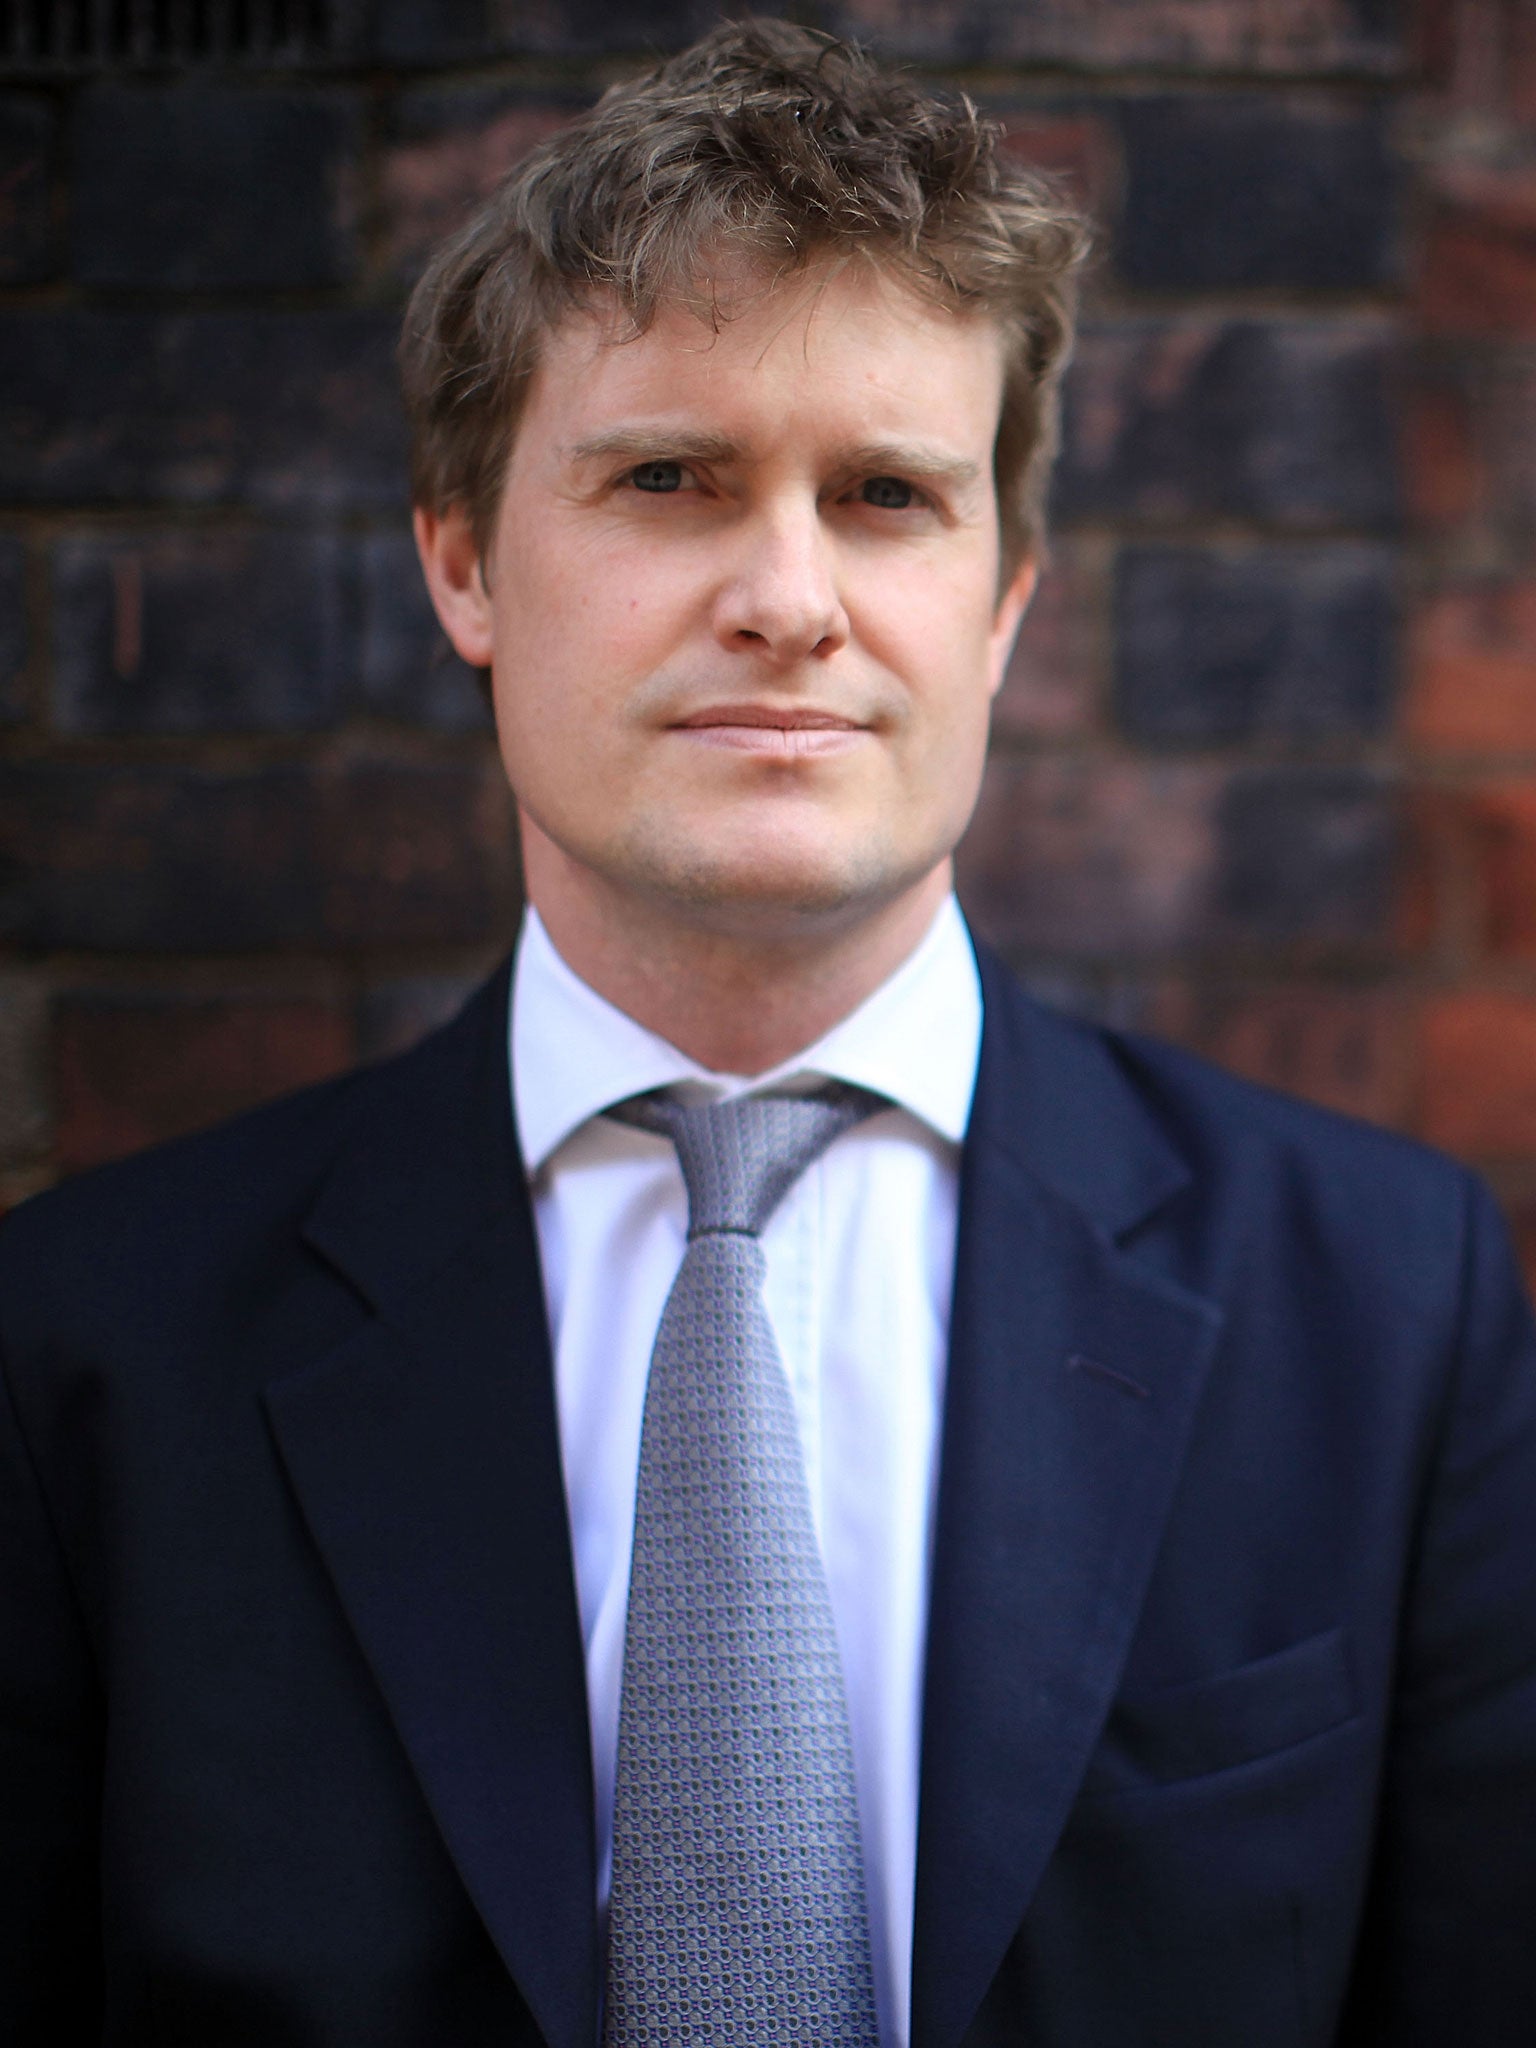 Tristram Hunt, the shadow Education Secretary, will claim that 'privatisation' and applying 'the profit motive' to schools 'could easily happen' if the Tories win another term